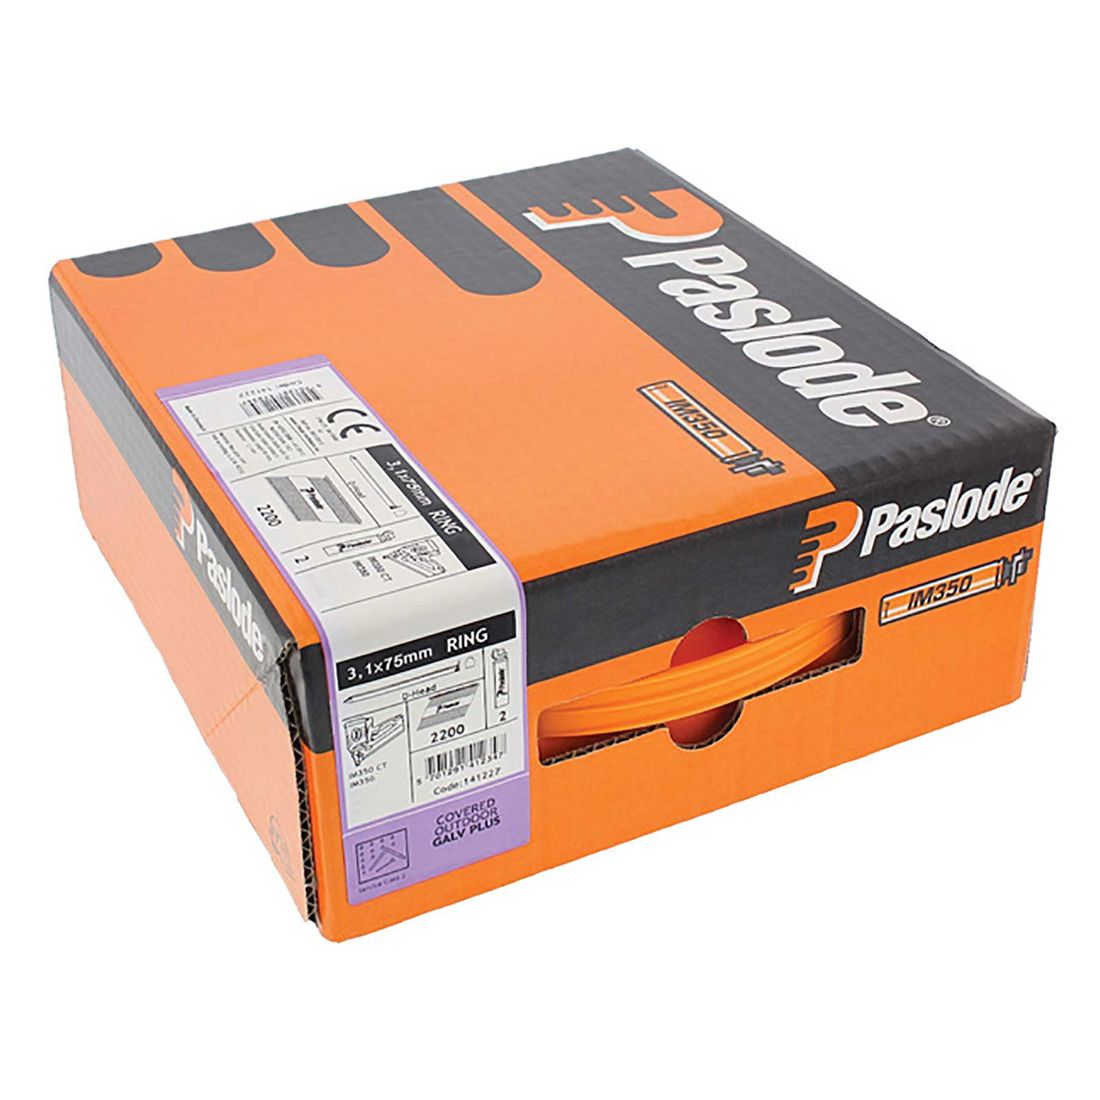 Paslode 75 X 3.1 Ring Galv+ Nail Fuel Pk For Im350 Pk2200